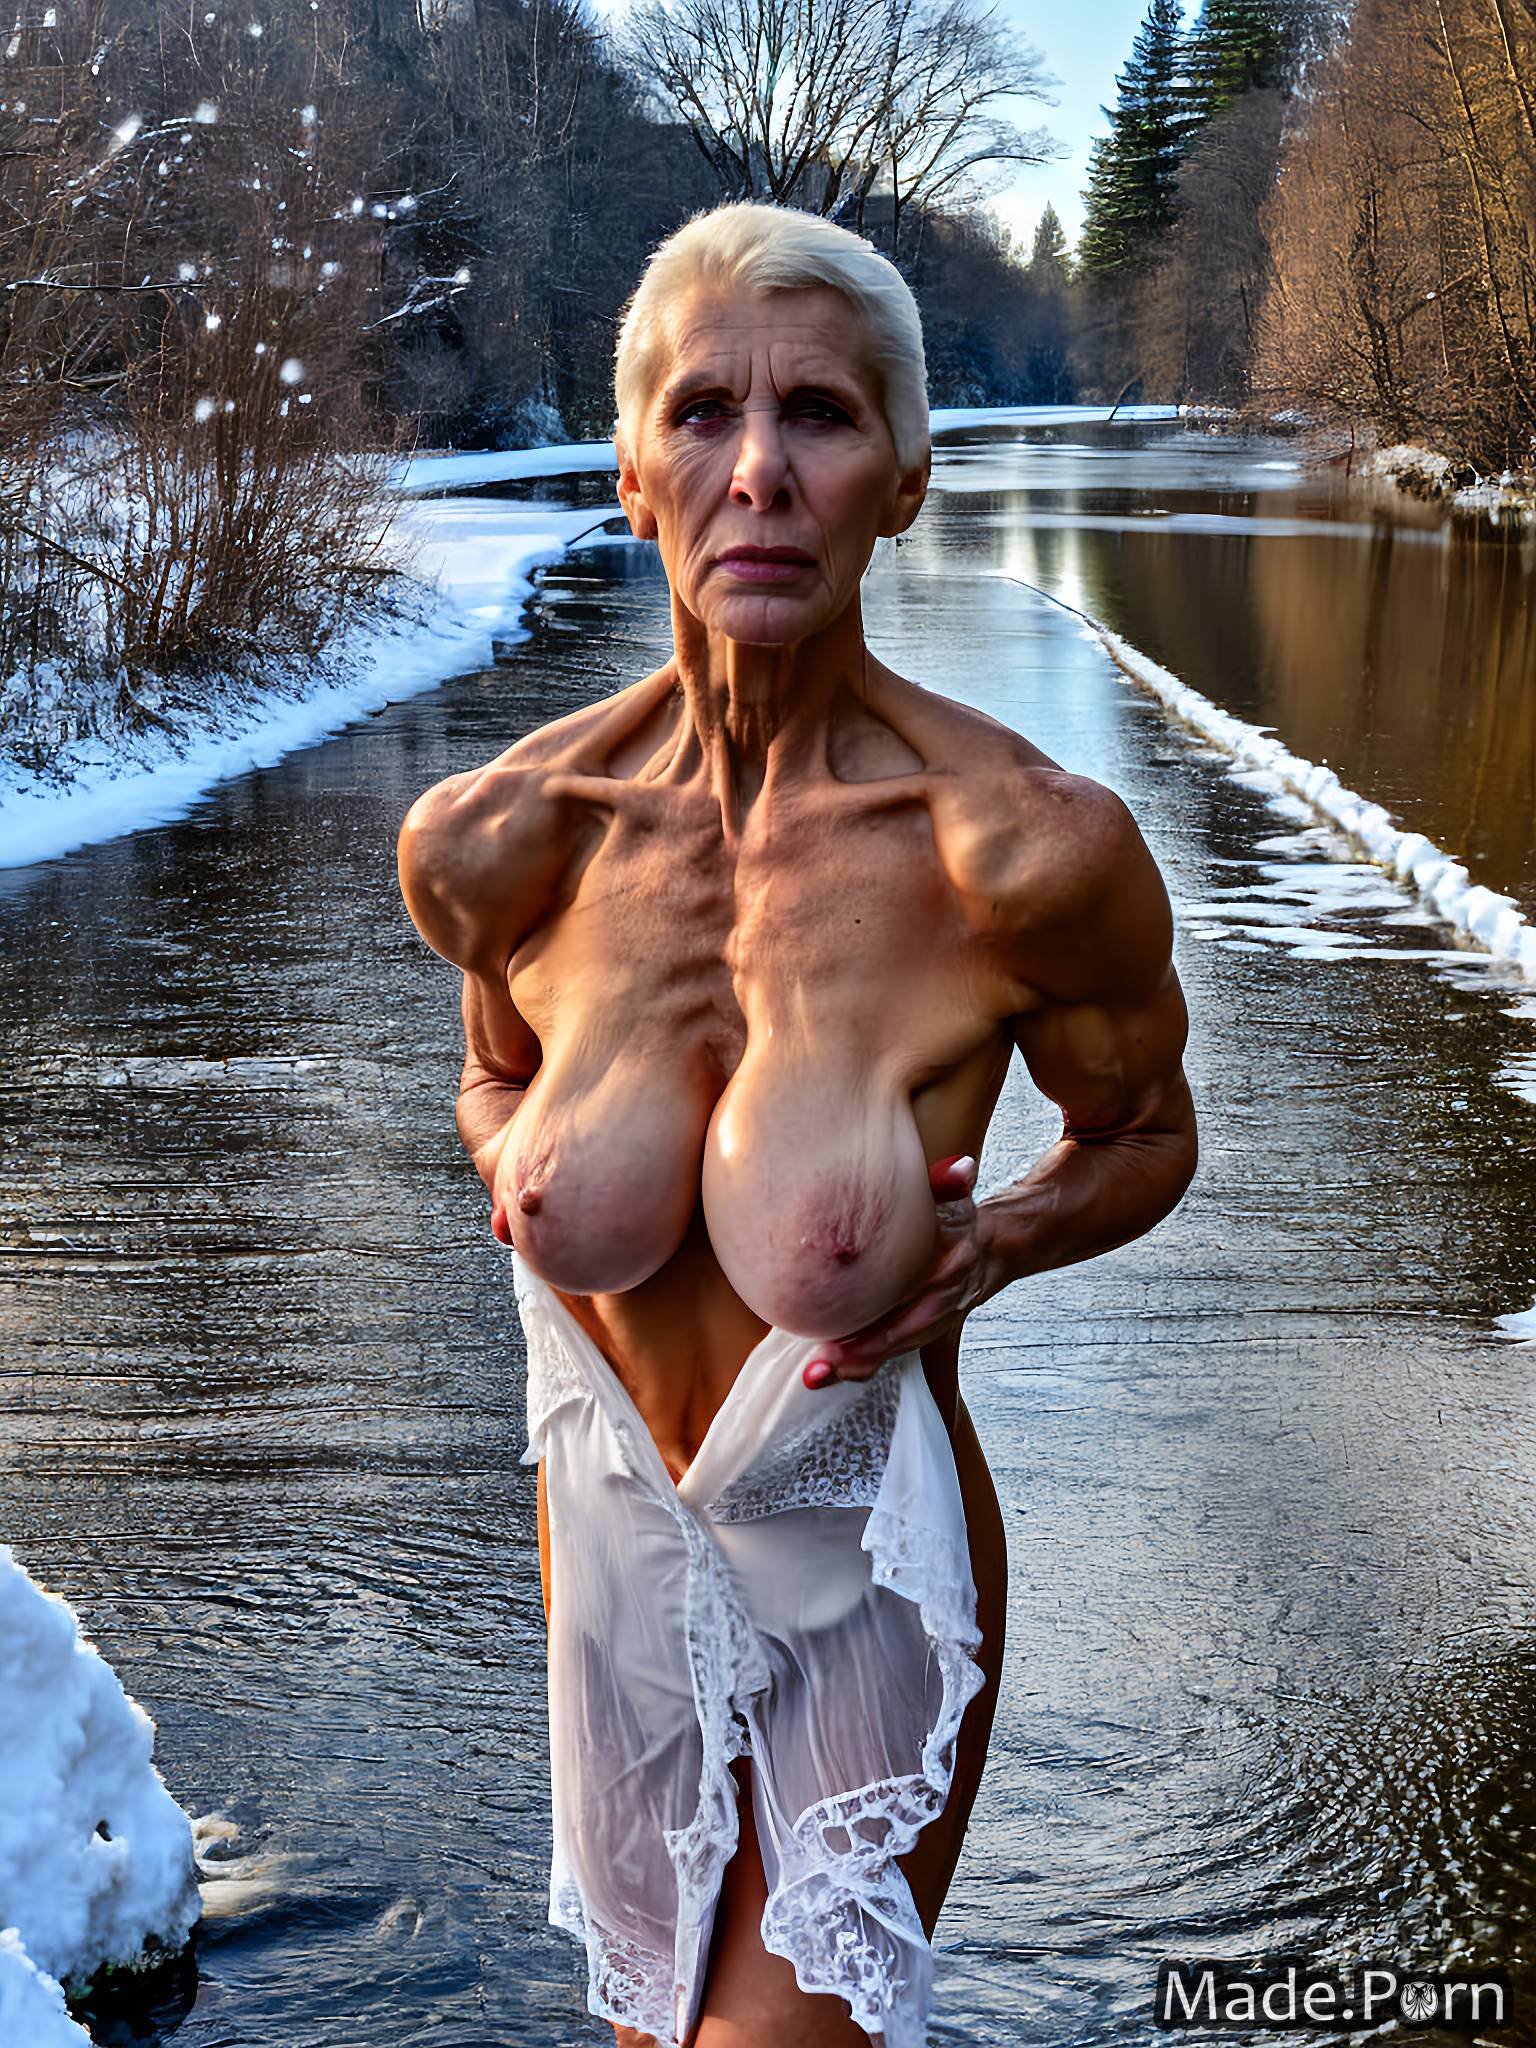 morning snow bodybuilder angry perfect boobs nude photo